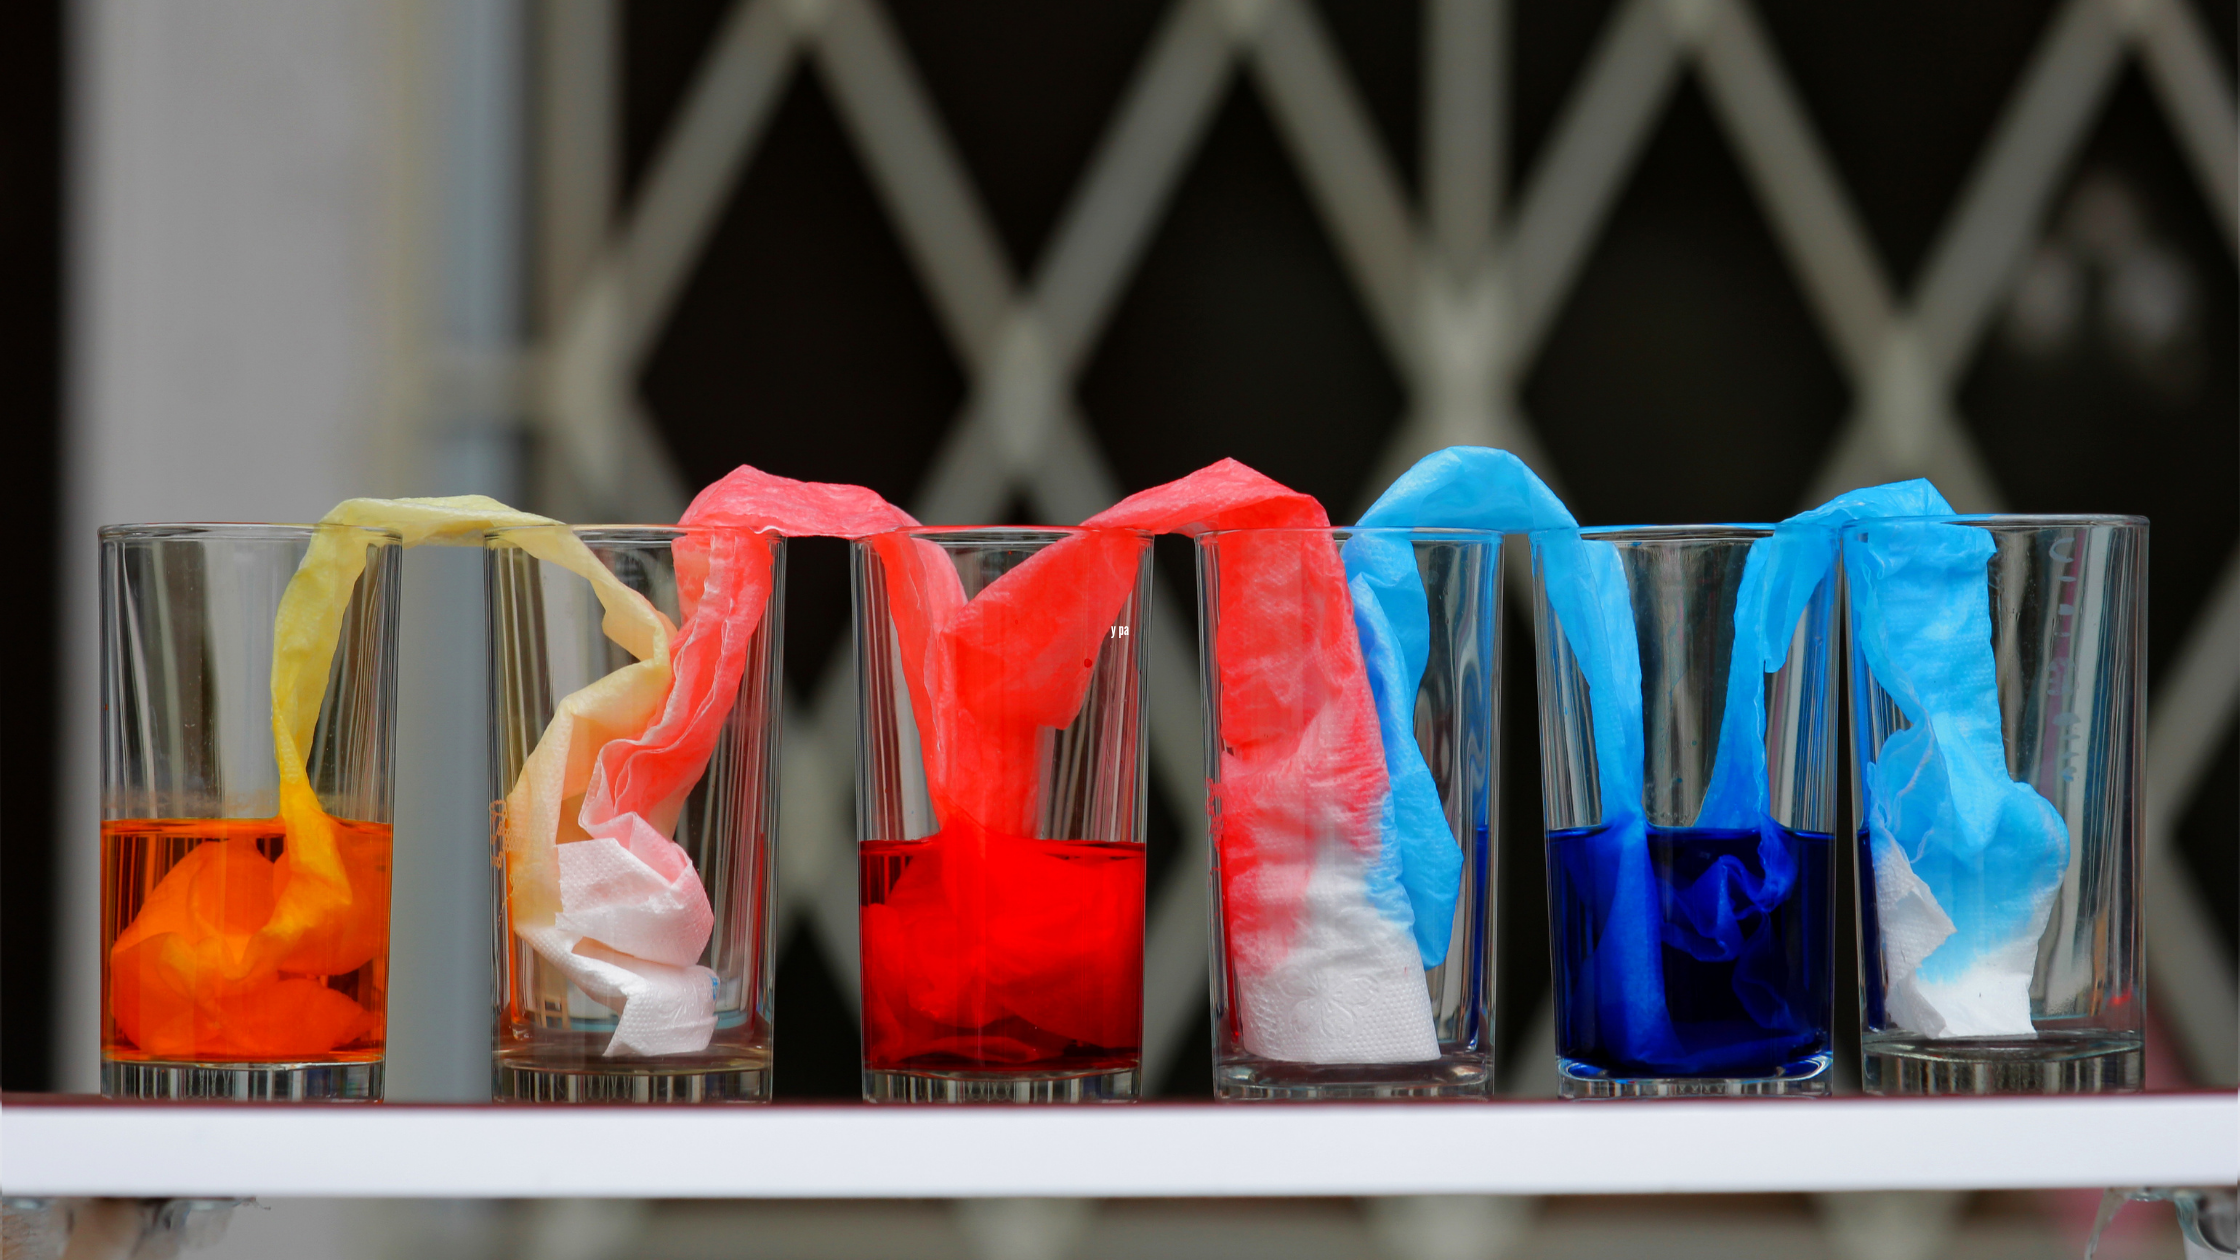 5 Fun & Cool Science Activities with Dye to Do With the Kids 44